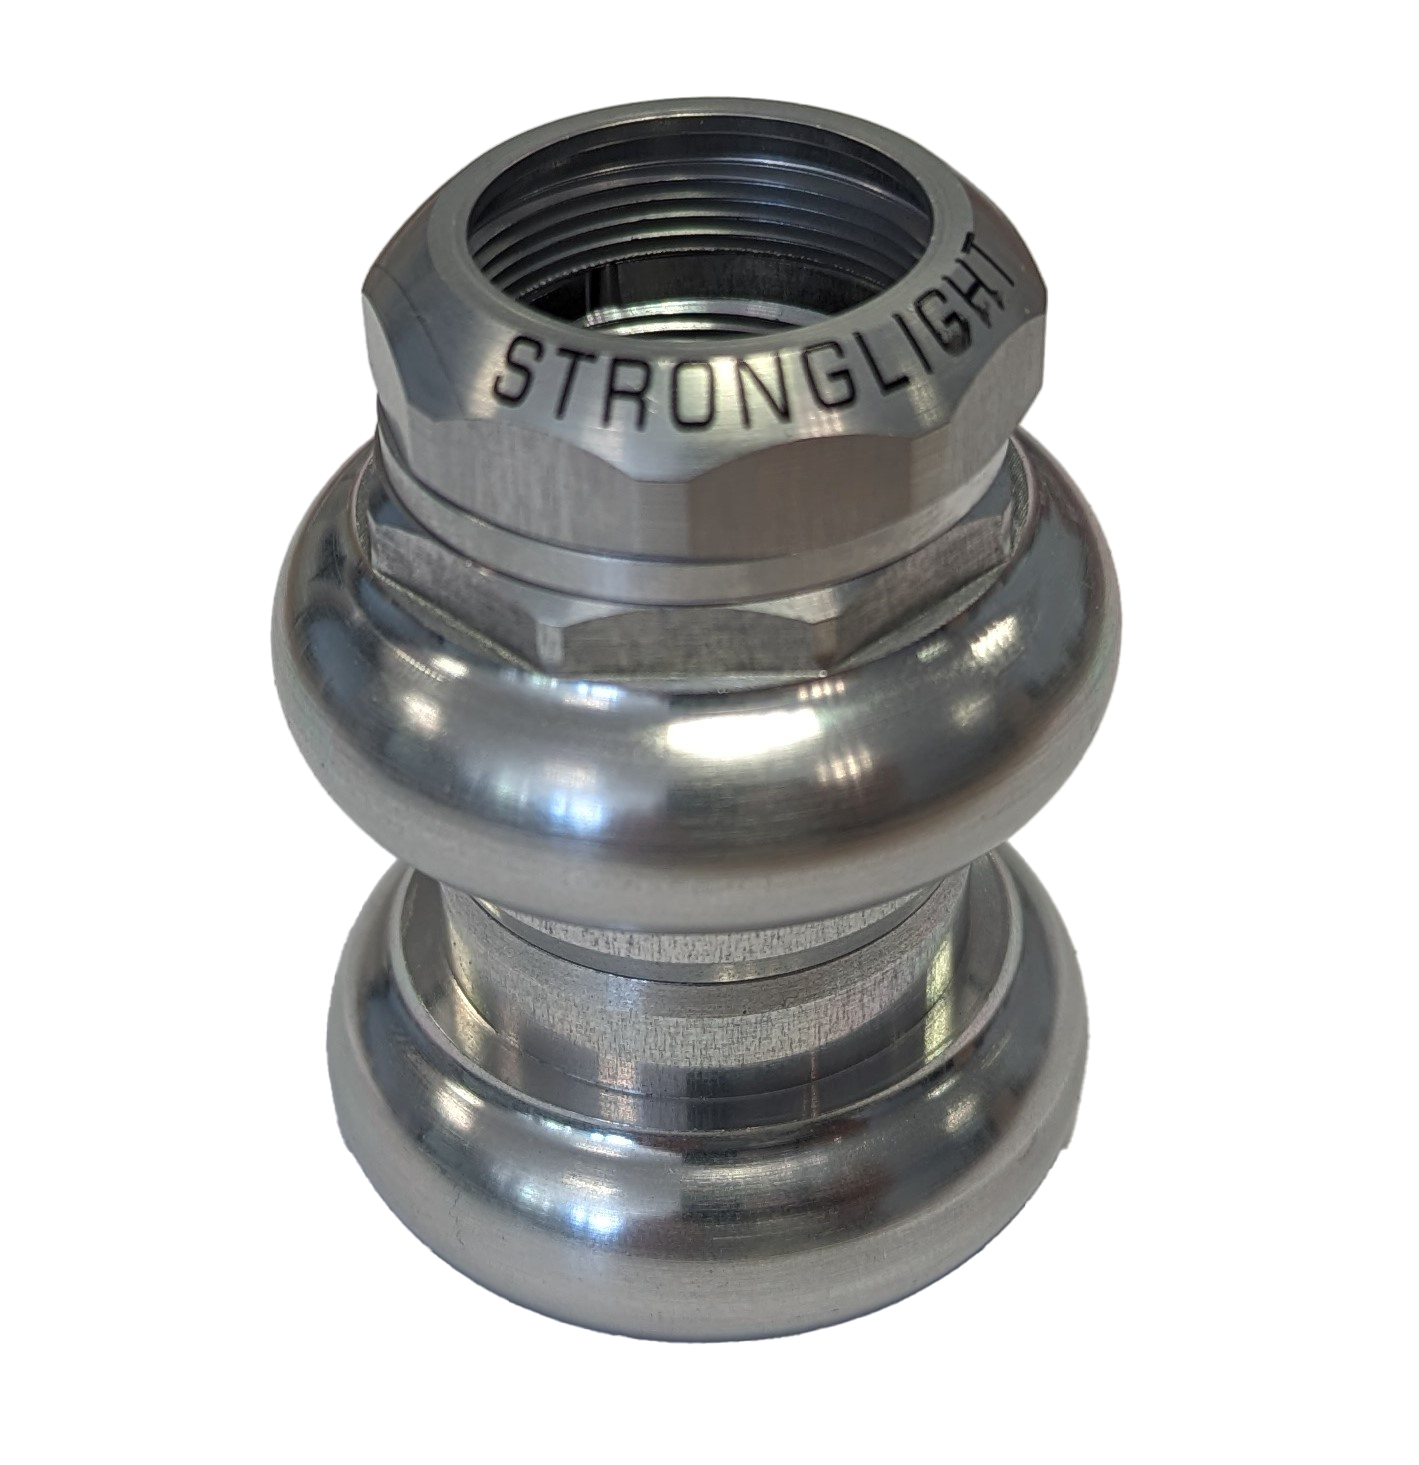 V0160 Stronglight ( 1" ) - JD A9 - Threaded Alloy Headset (Sealed)